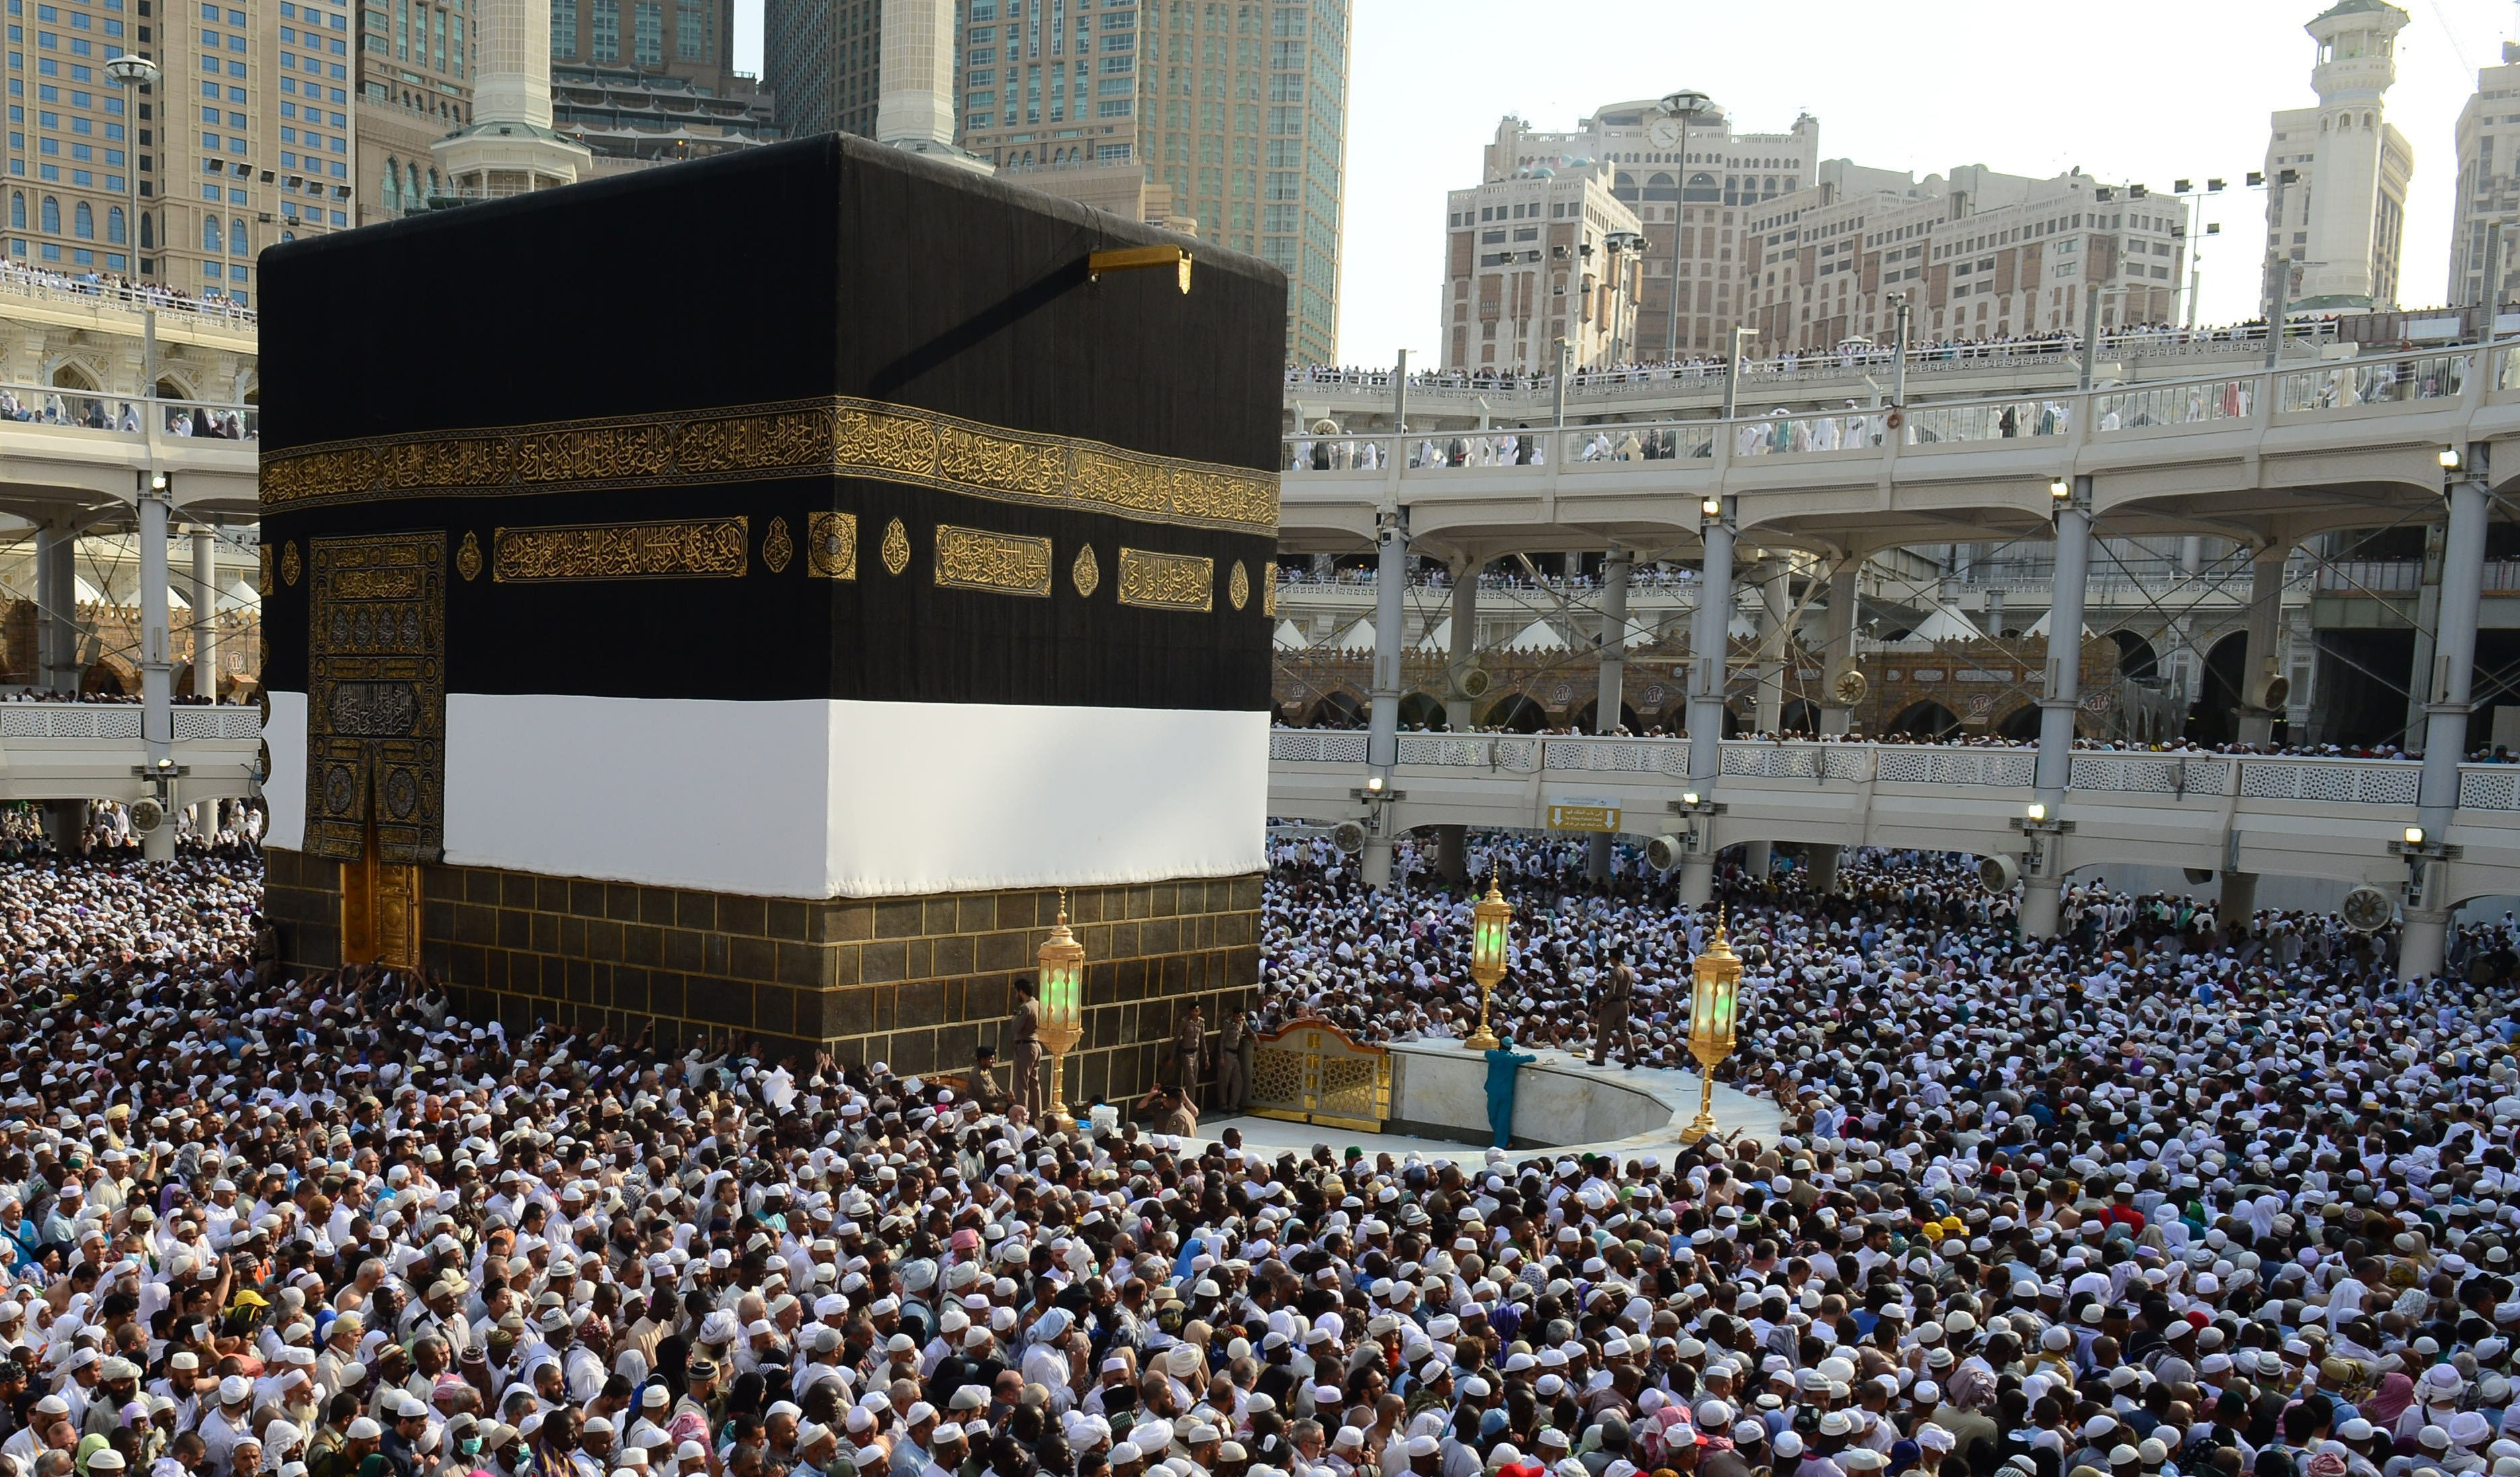 Muslim pilgrims from all around the world circle counterclockwise Islam's holiest shrine, the Kaaba, ahead of upcoming Eid Al-Adha (Feast of Sacrifice) at Masjid al-Haram (the Grand Mosque) in the Muslim holy city of Mecca, Saudi Arabia on September 30, 2014. (Anadolu Agency—Getty Images)